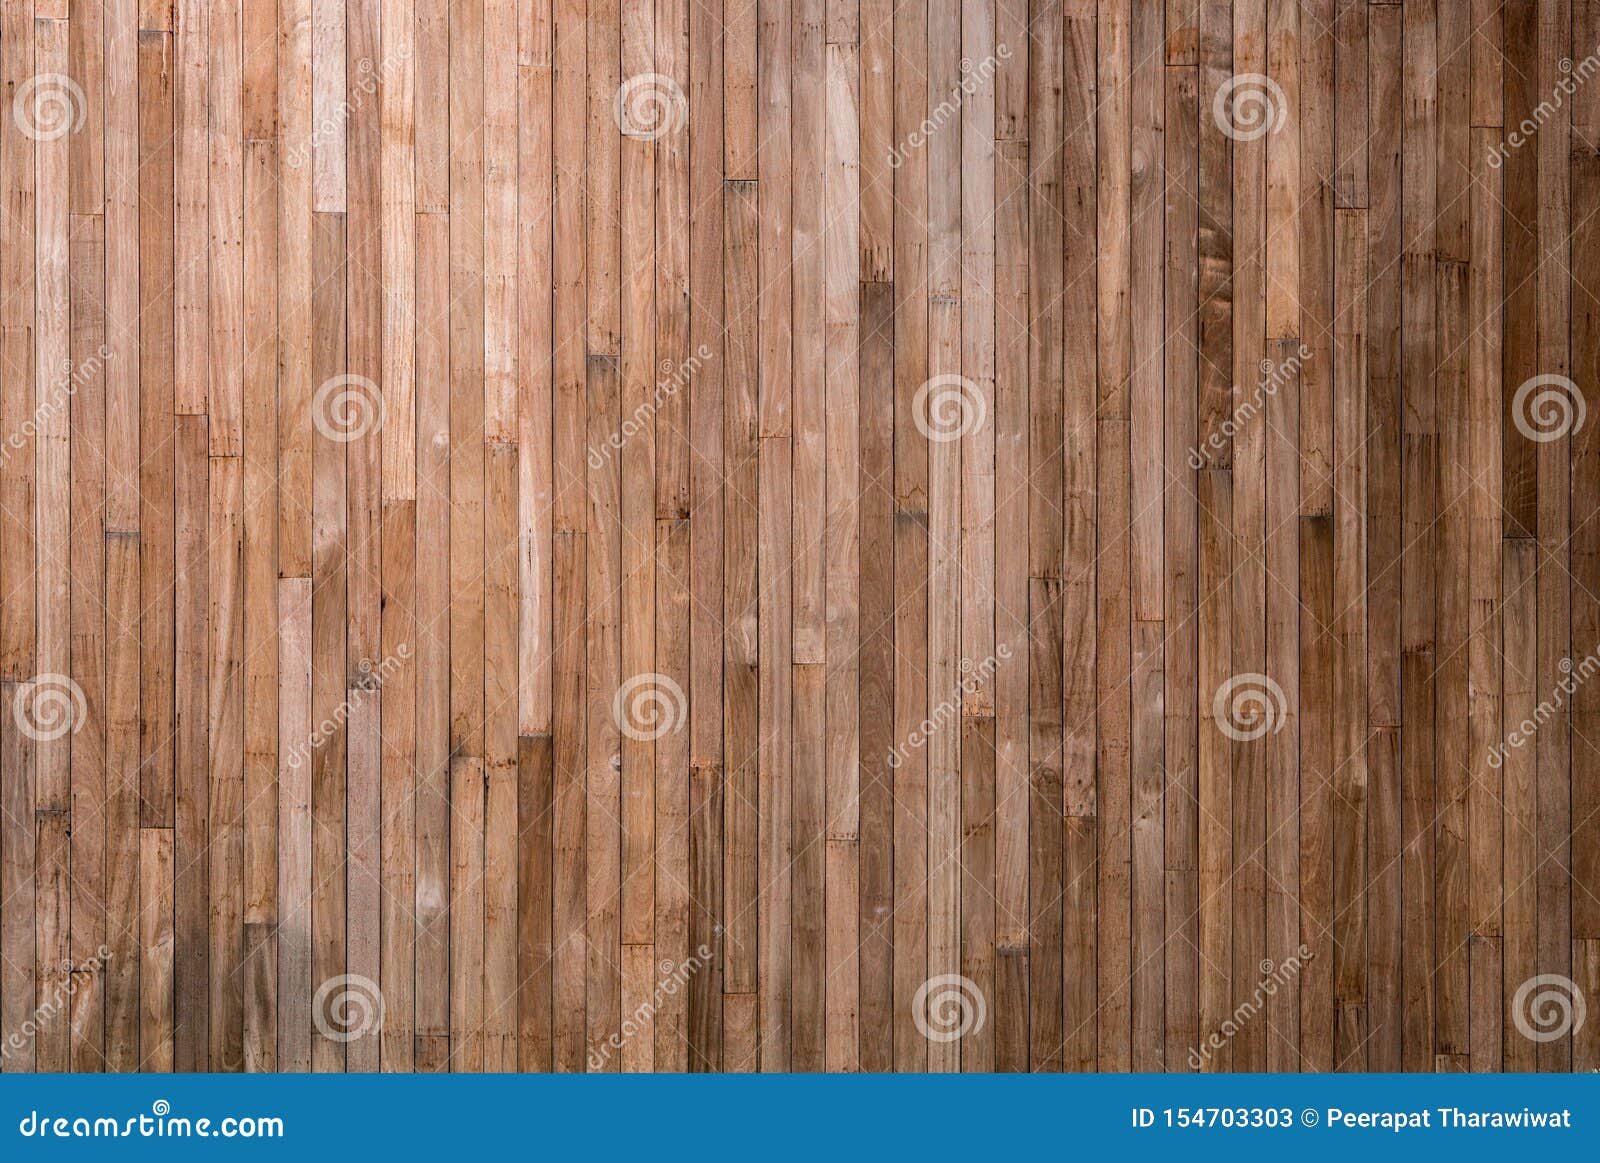 natural old wood plank wall or wooden floor of vintage house, use for wooden artwork 